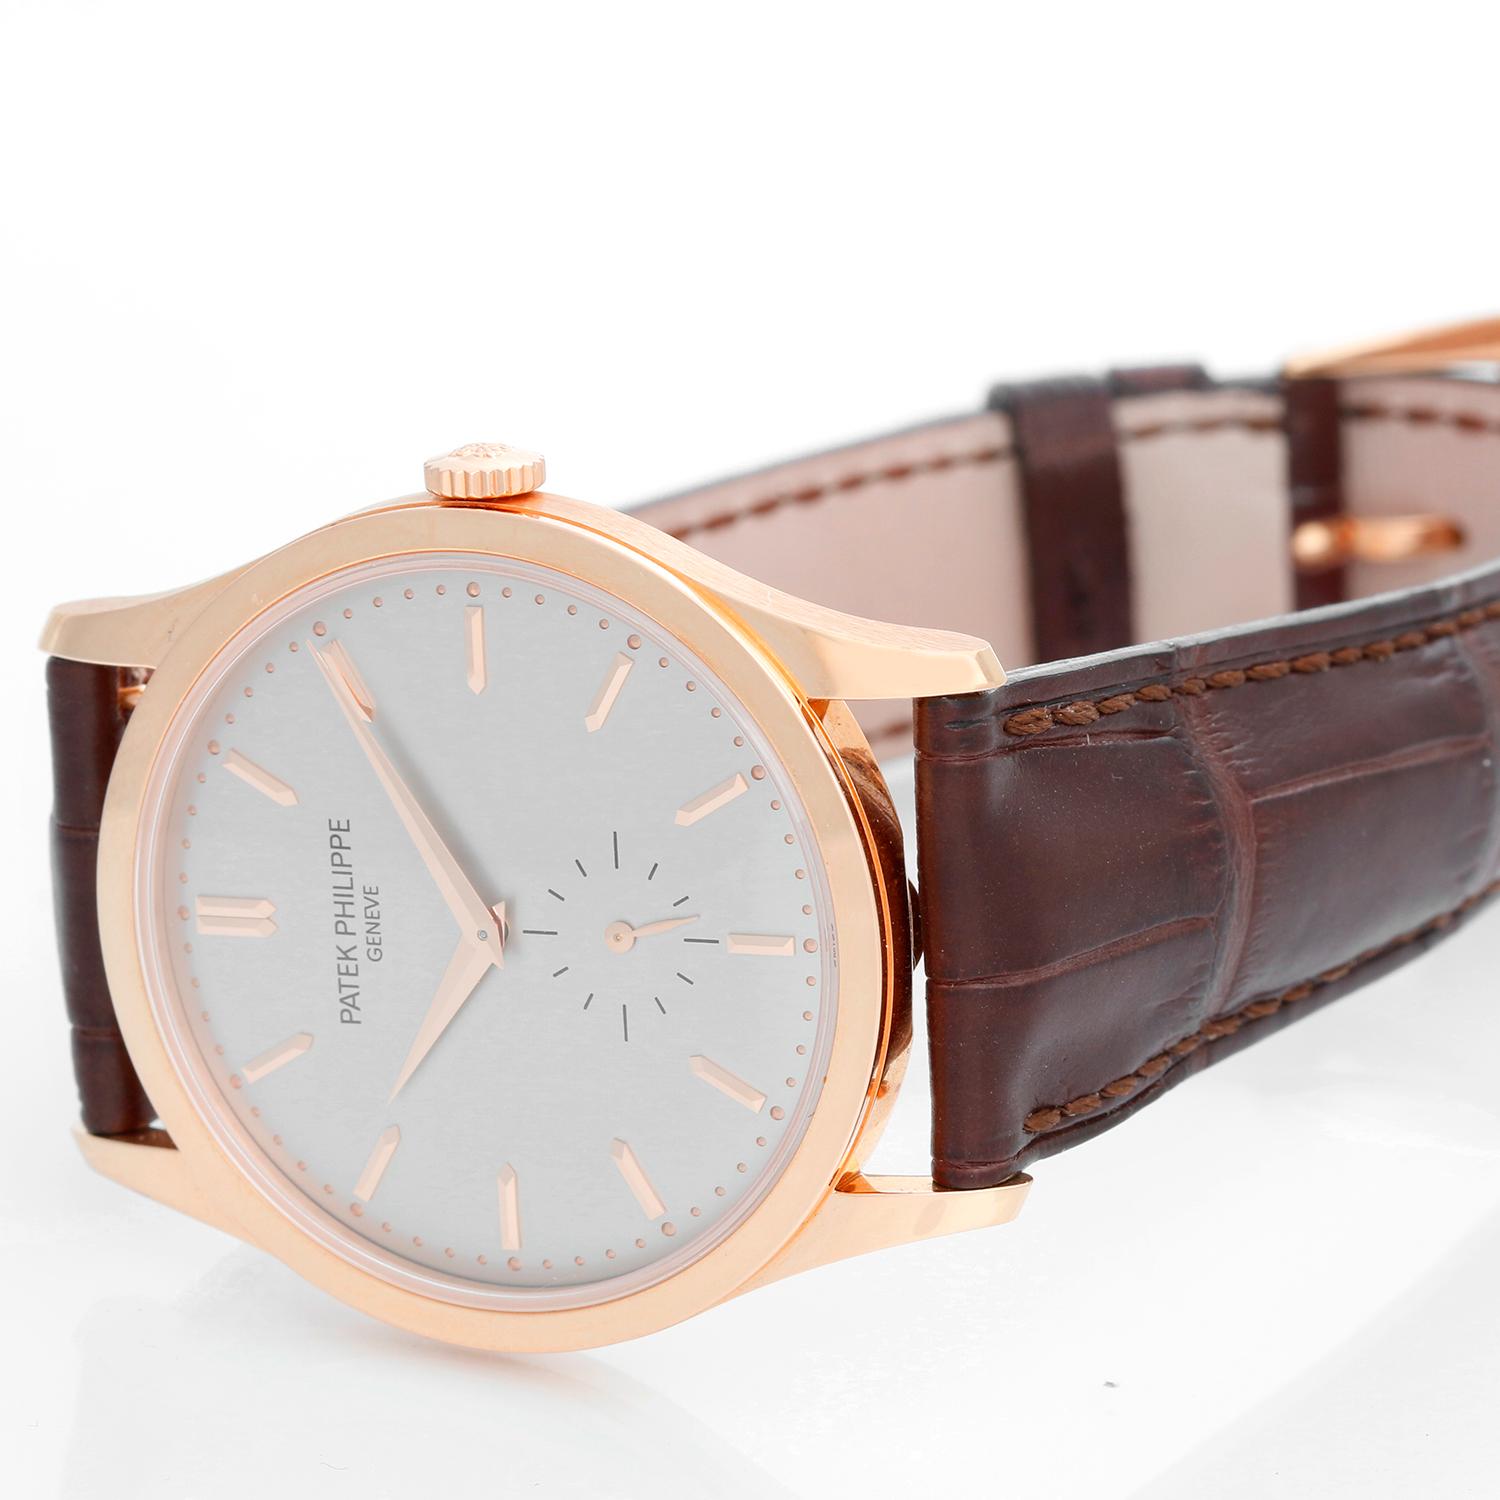 Patek Philippe Calatrava 18k Yellow Gold Men's  5196-R (or 5196R) - Manual winding. 18k rose gold case (37mm diameter). Silver dial with rose gold markers . Patek Philippe strap band and 18k rose gold buckle. Unused with box and papers.